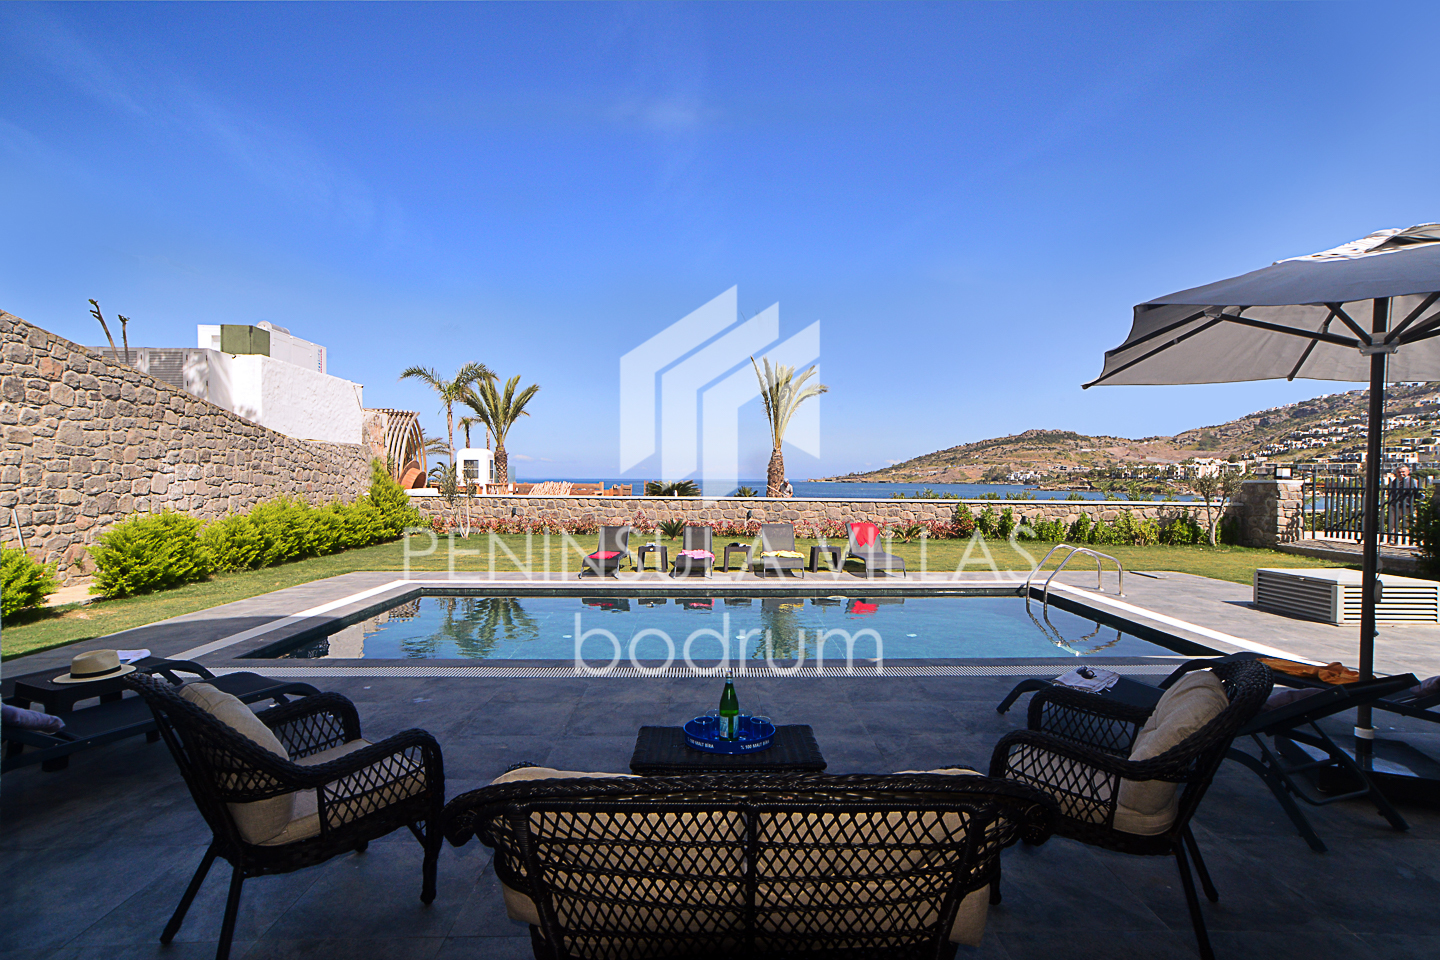 Sea and beach front holiday villas for rent Peninsula Villas Bodrum